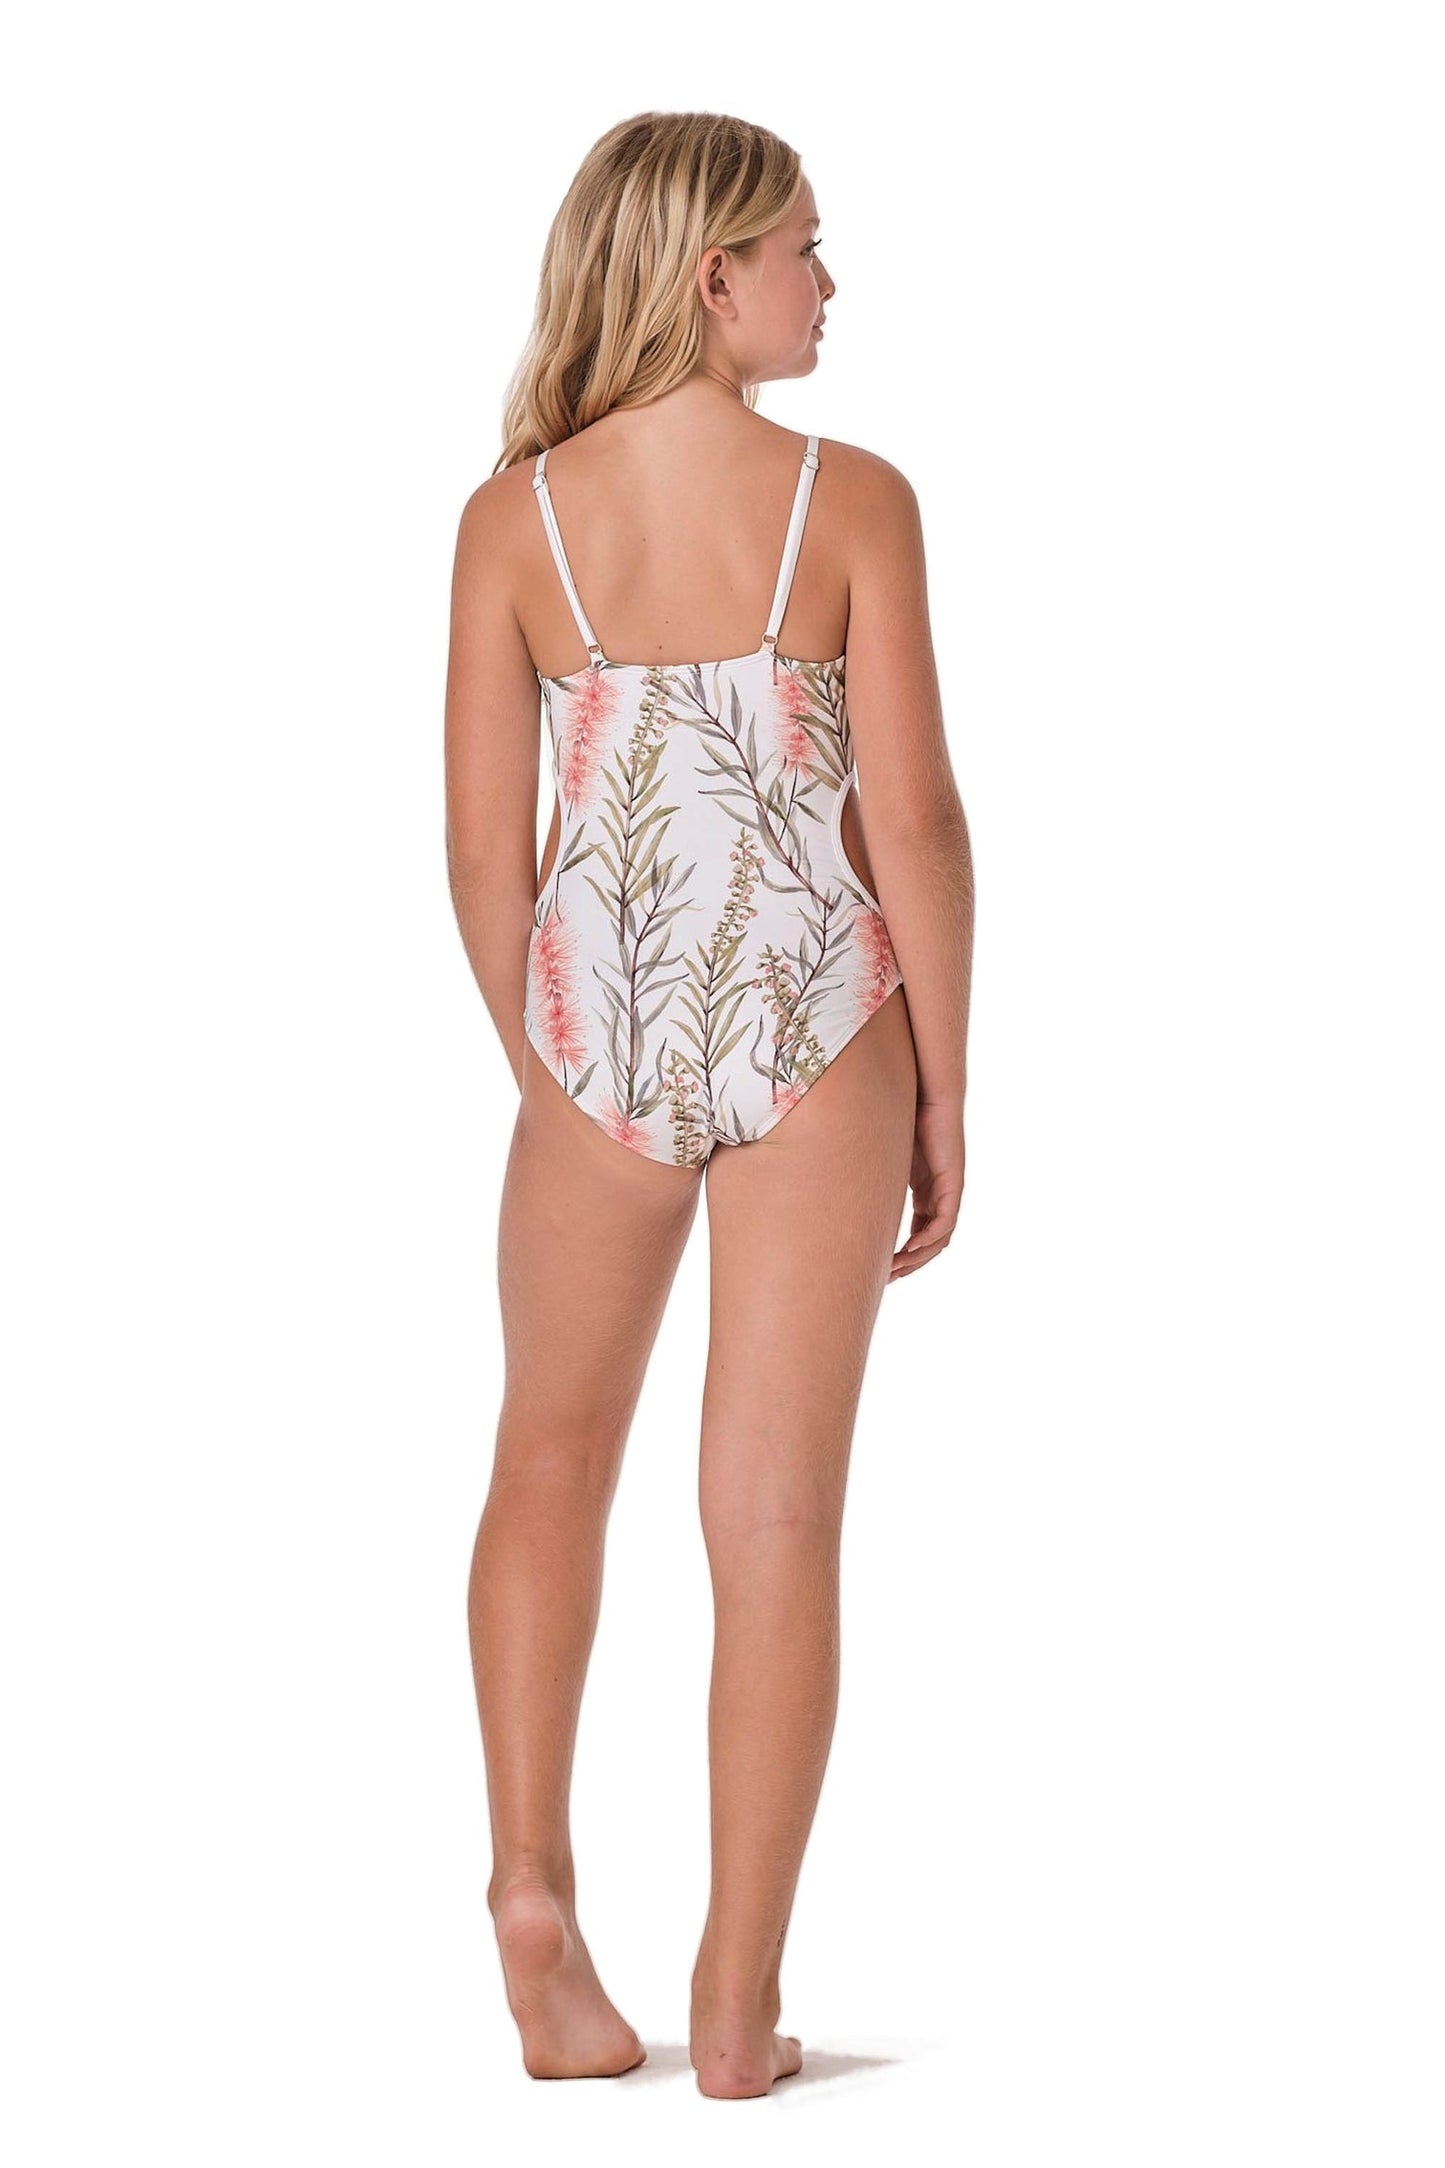 Model image of a cut out one piece swim suit for girls. Print is white with floral and paradise like designs